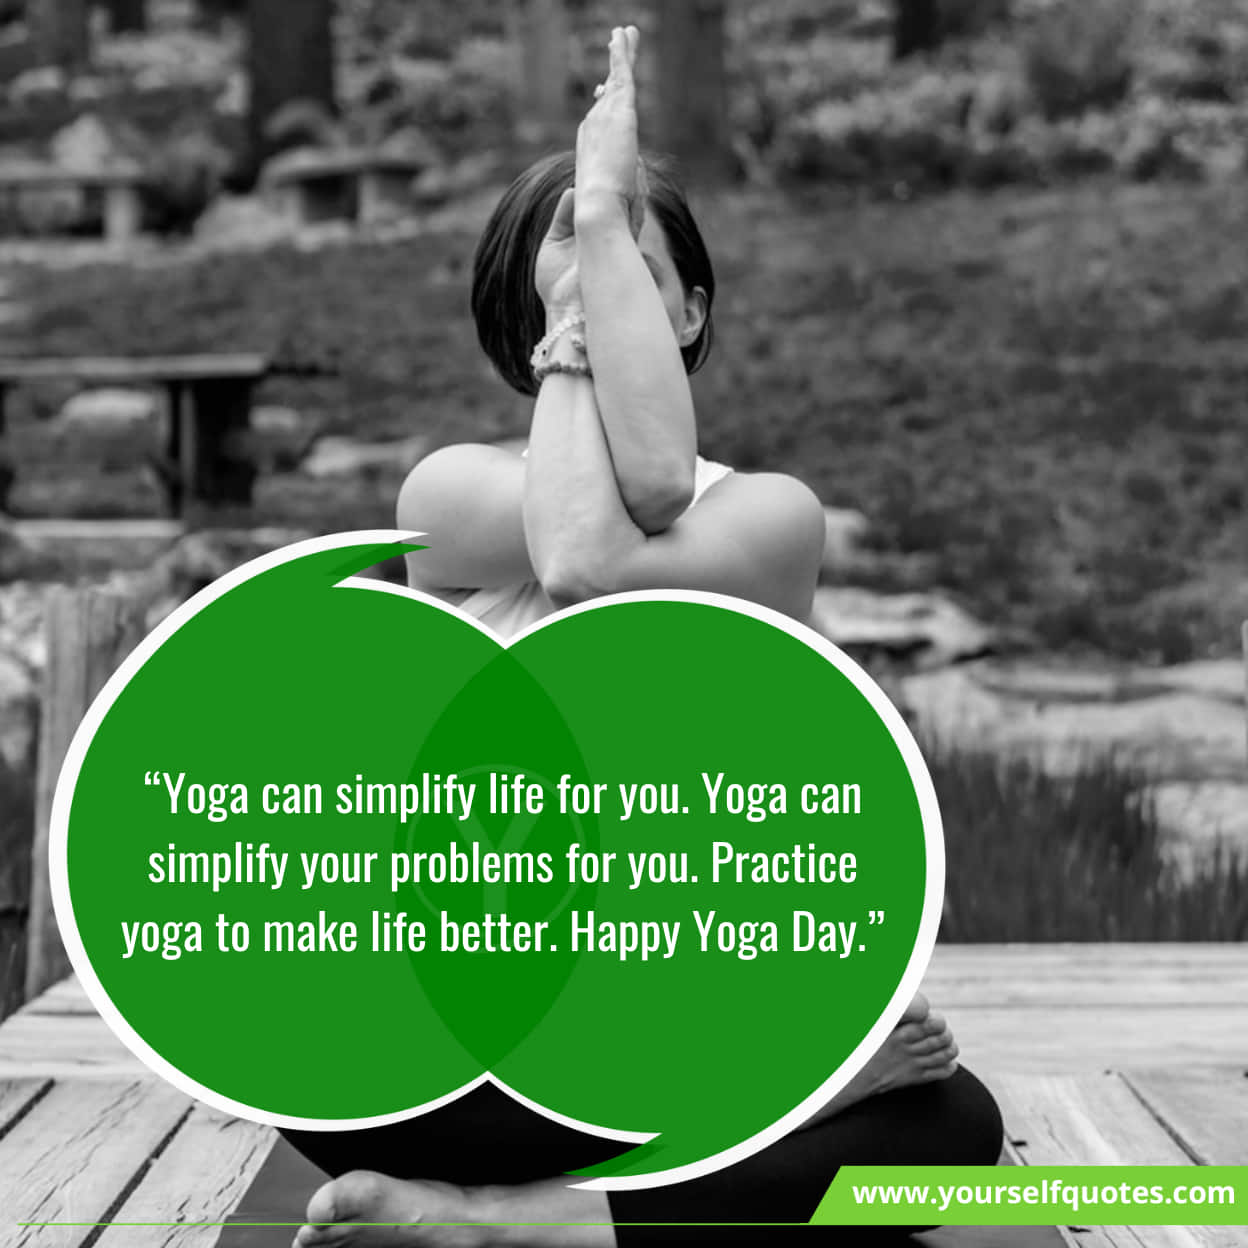 Famous Quotes, Sayings On Yoga Day